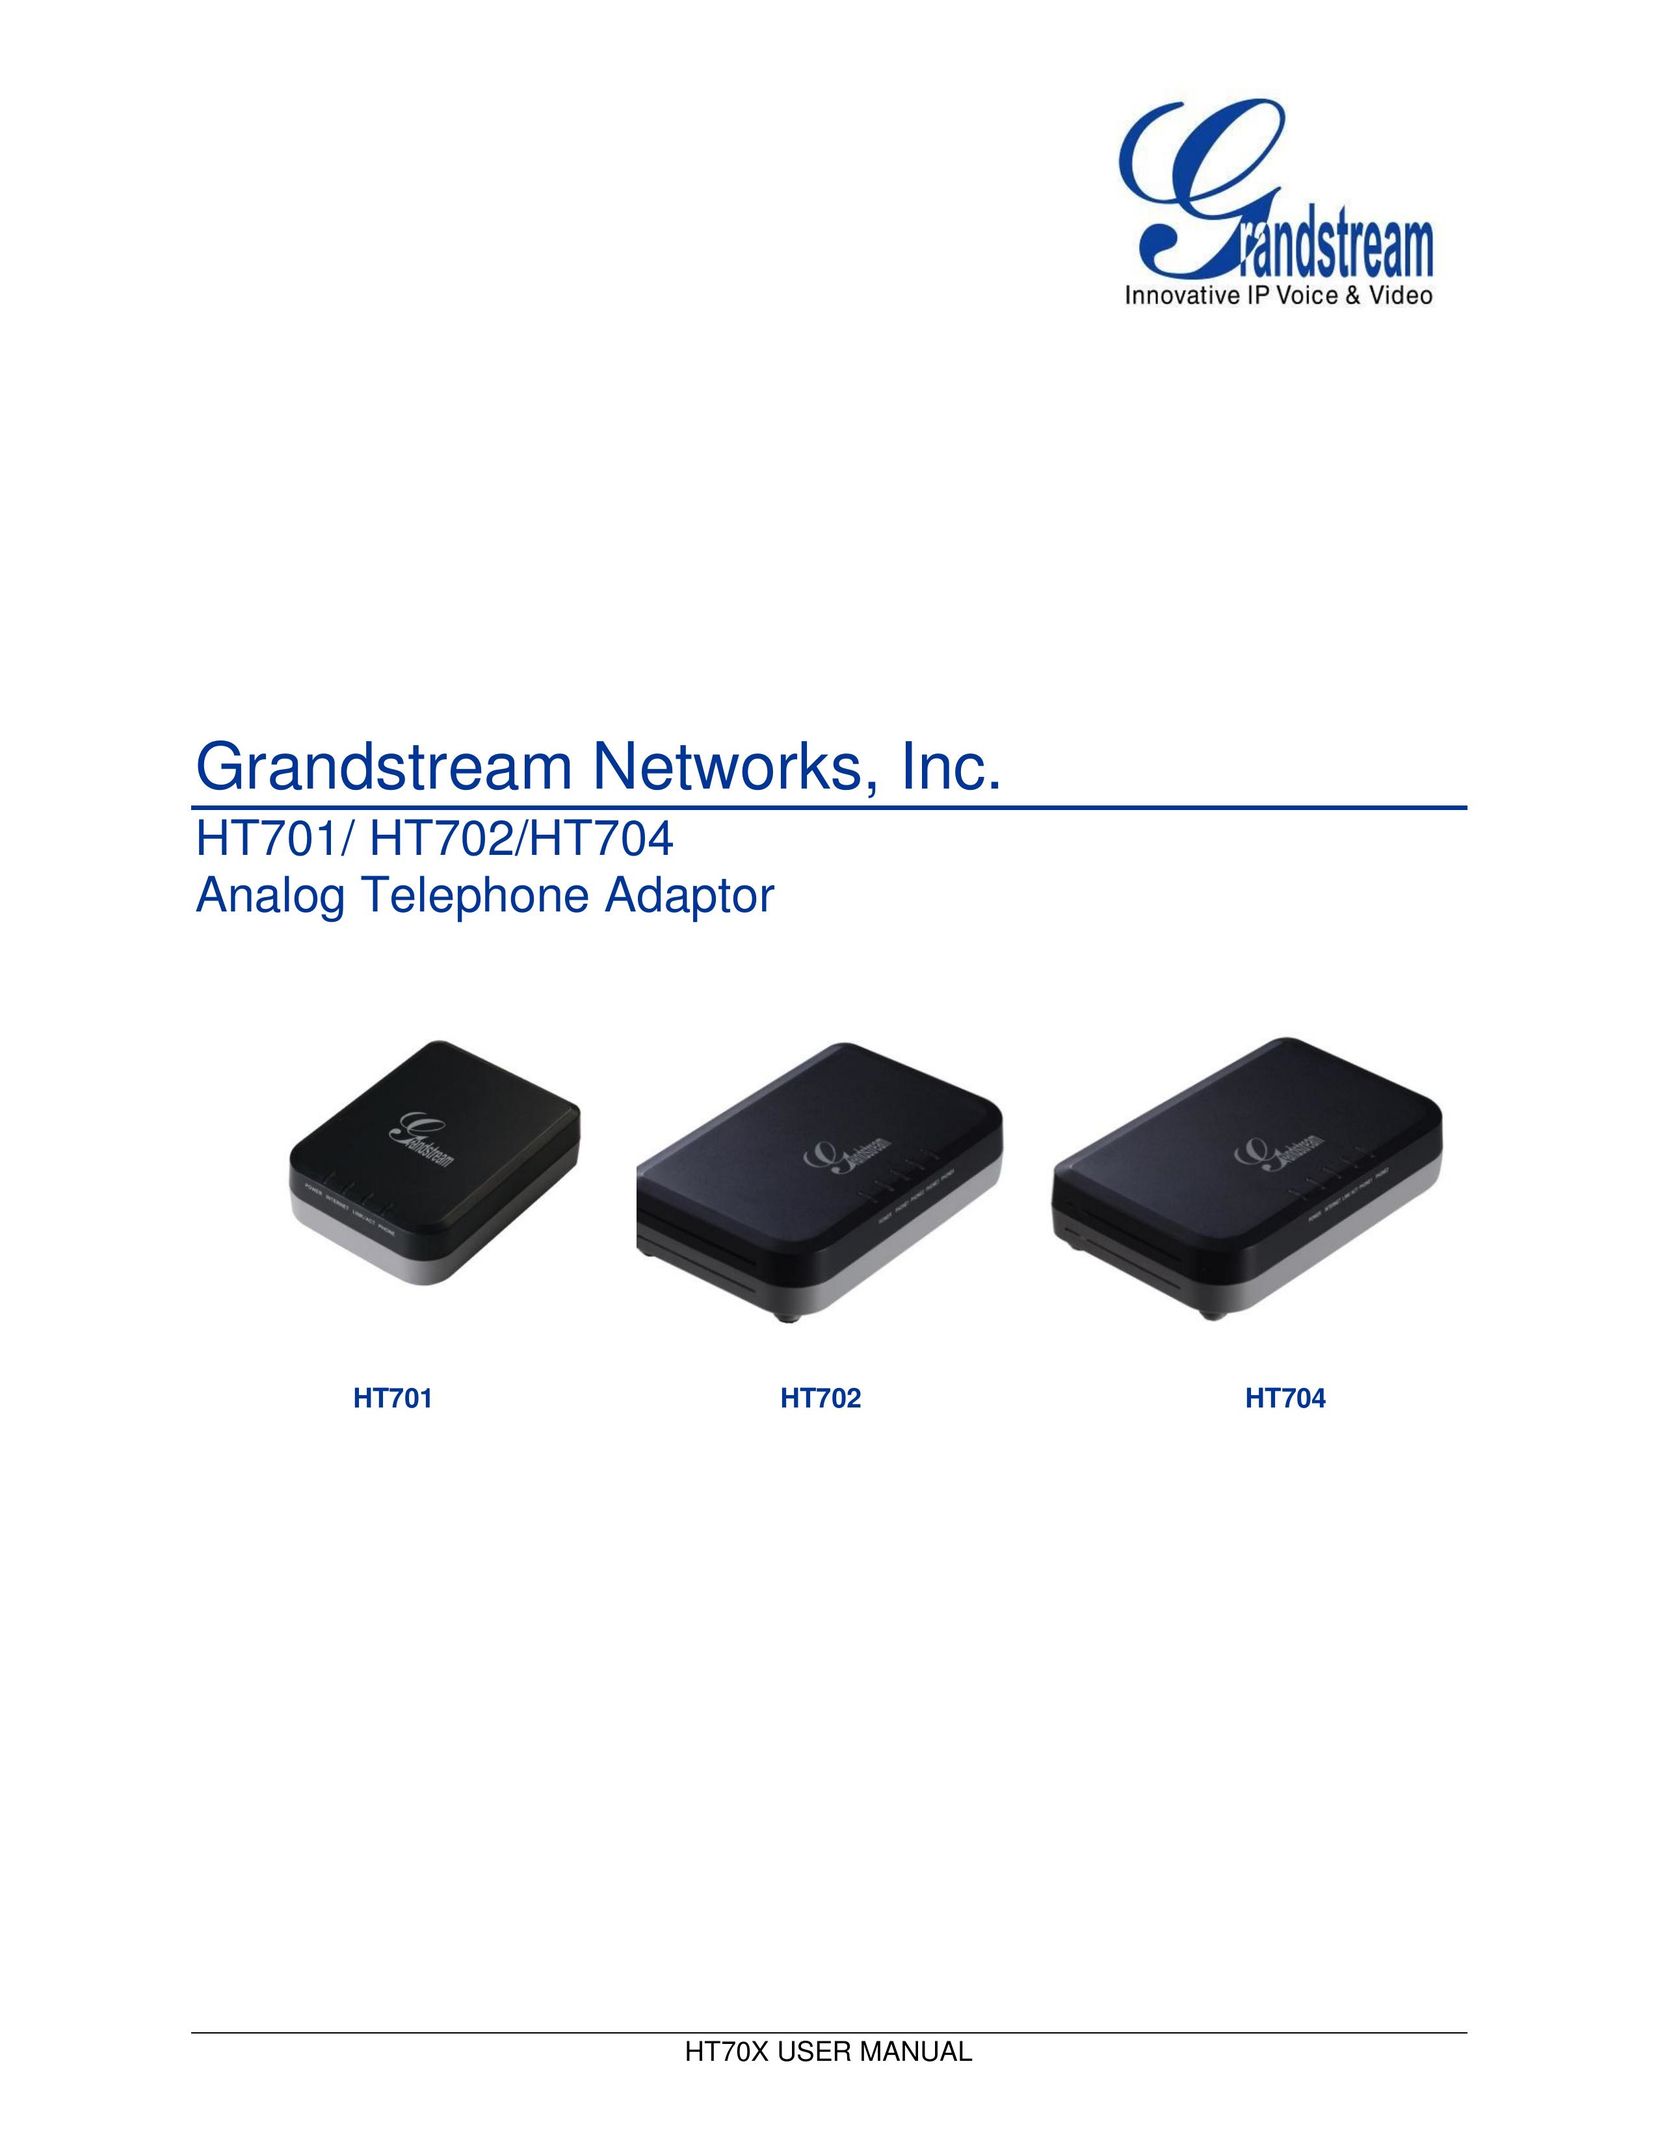 Grandstream Networks HT704 Telephone Accessories User Manual